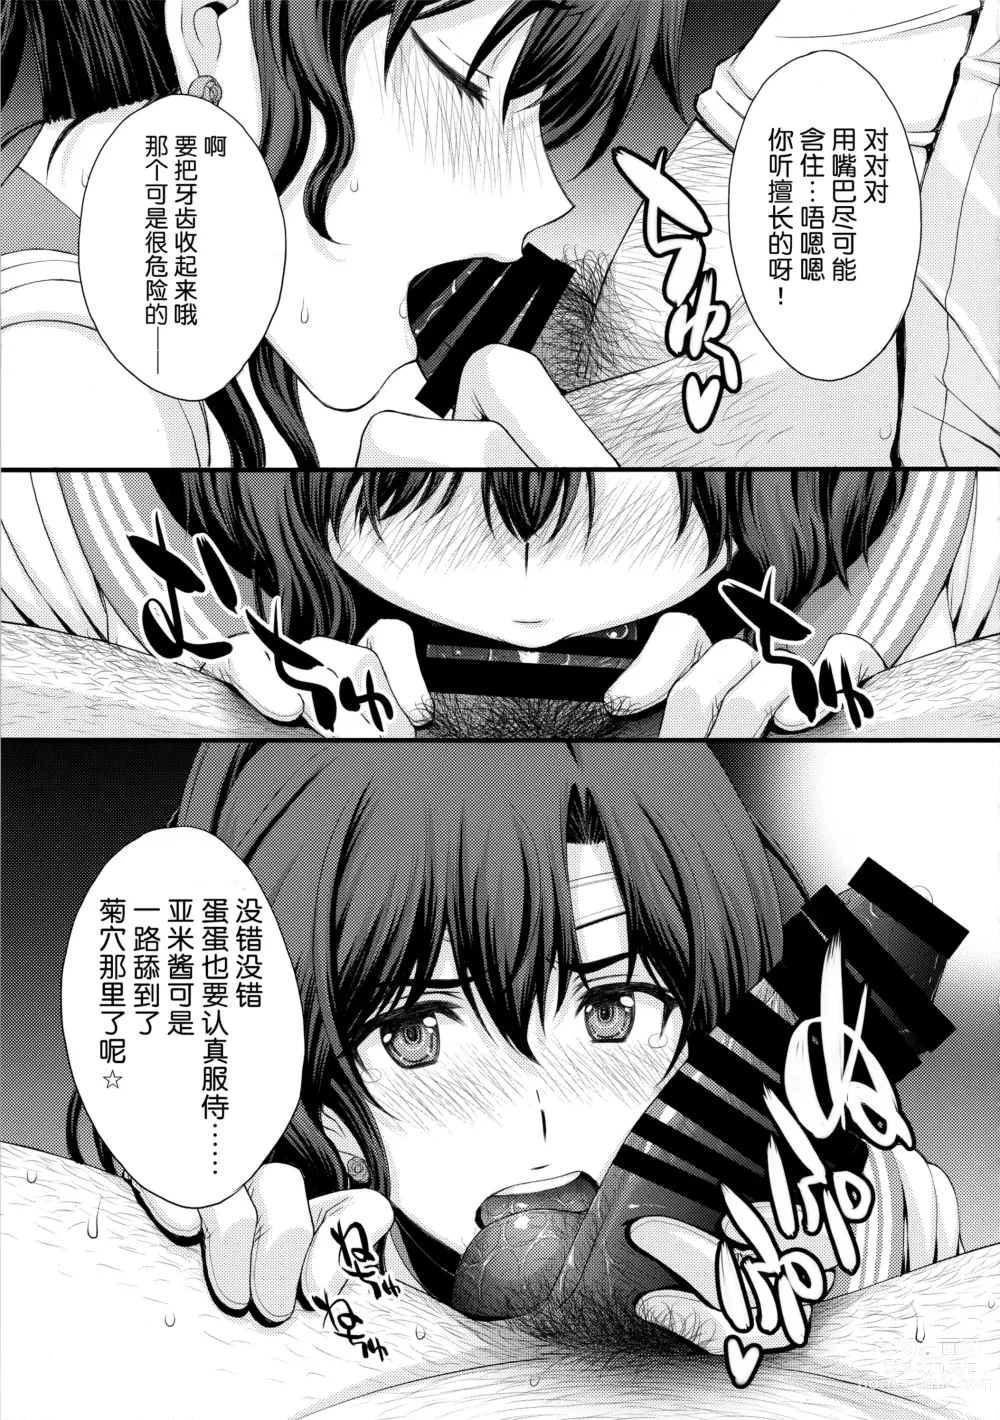 Page 16 of doujinshi 败给肉棒的真琴酱with亚米酱